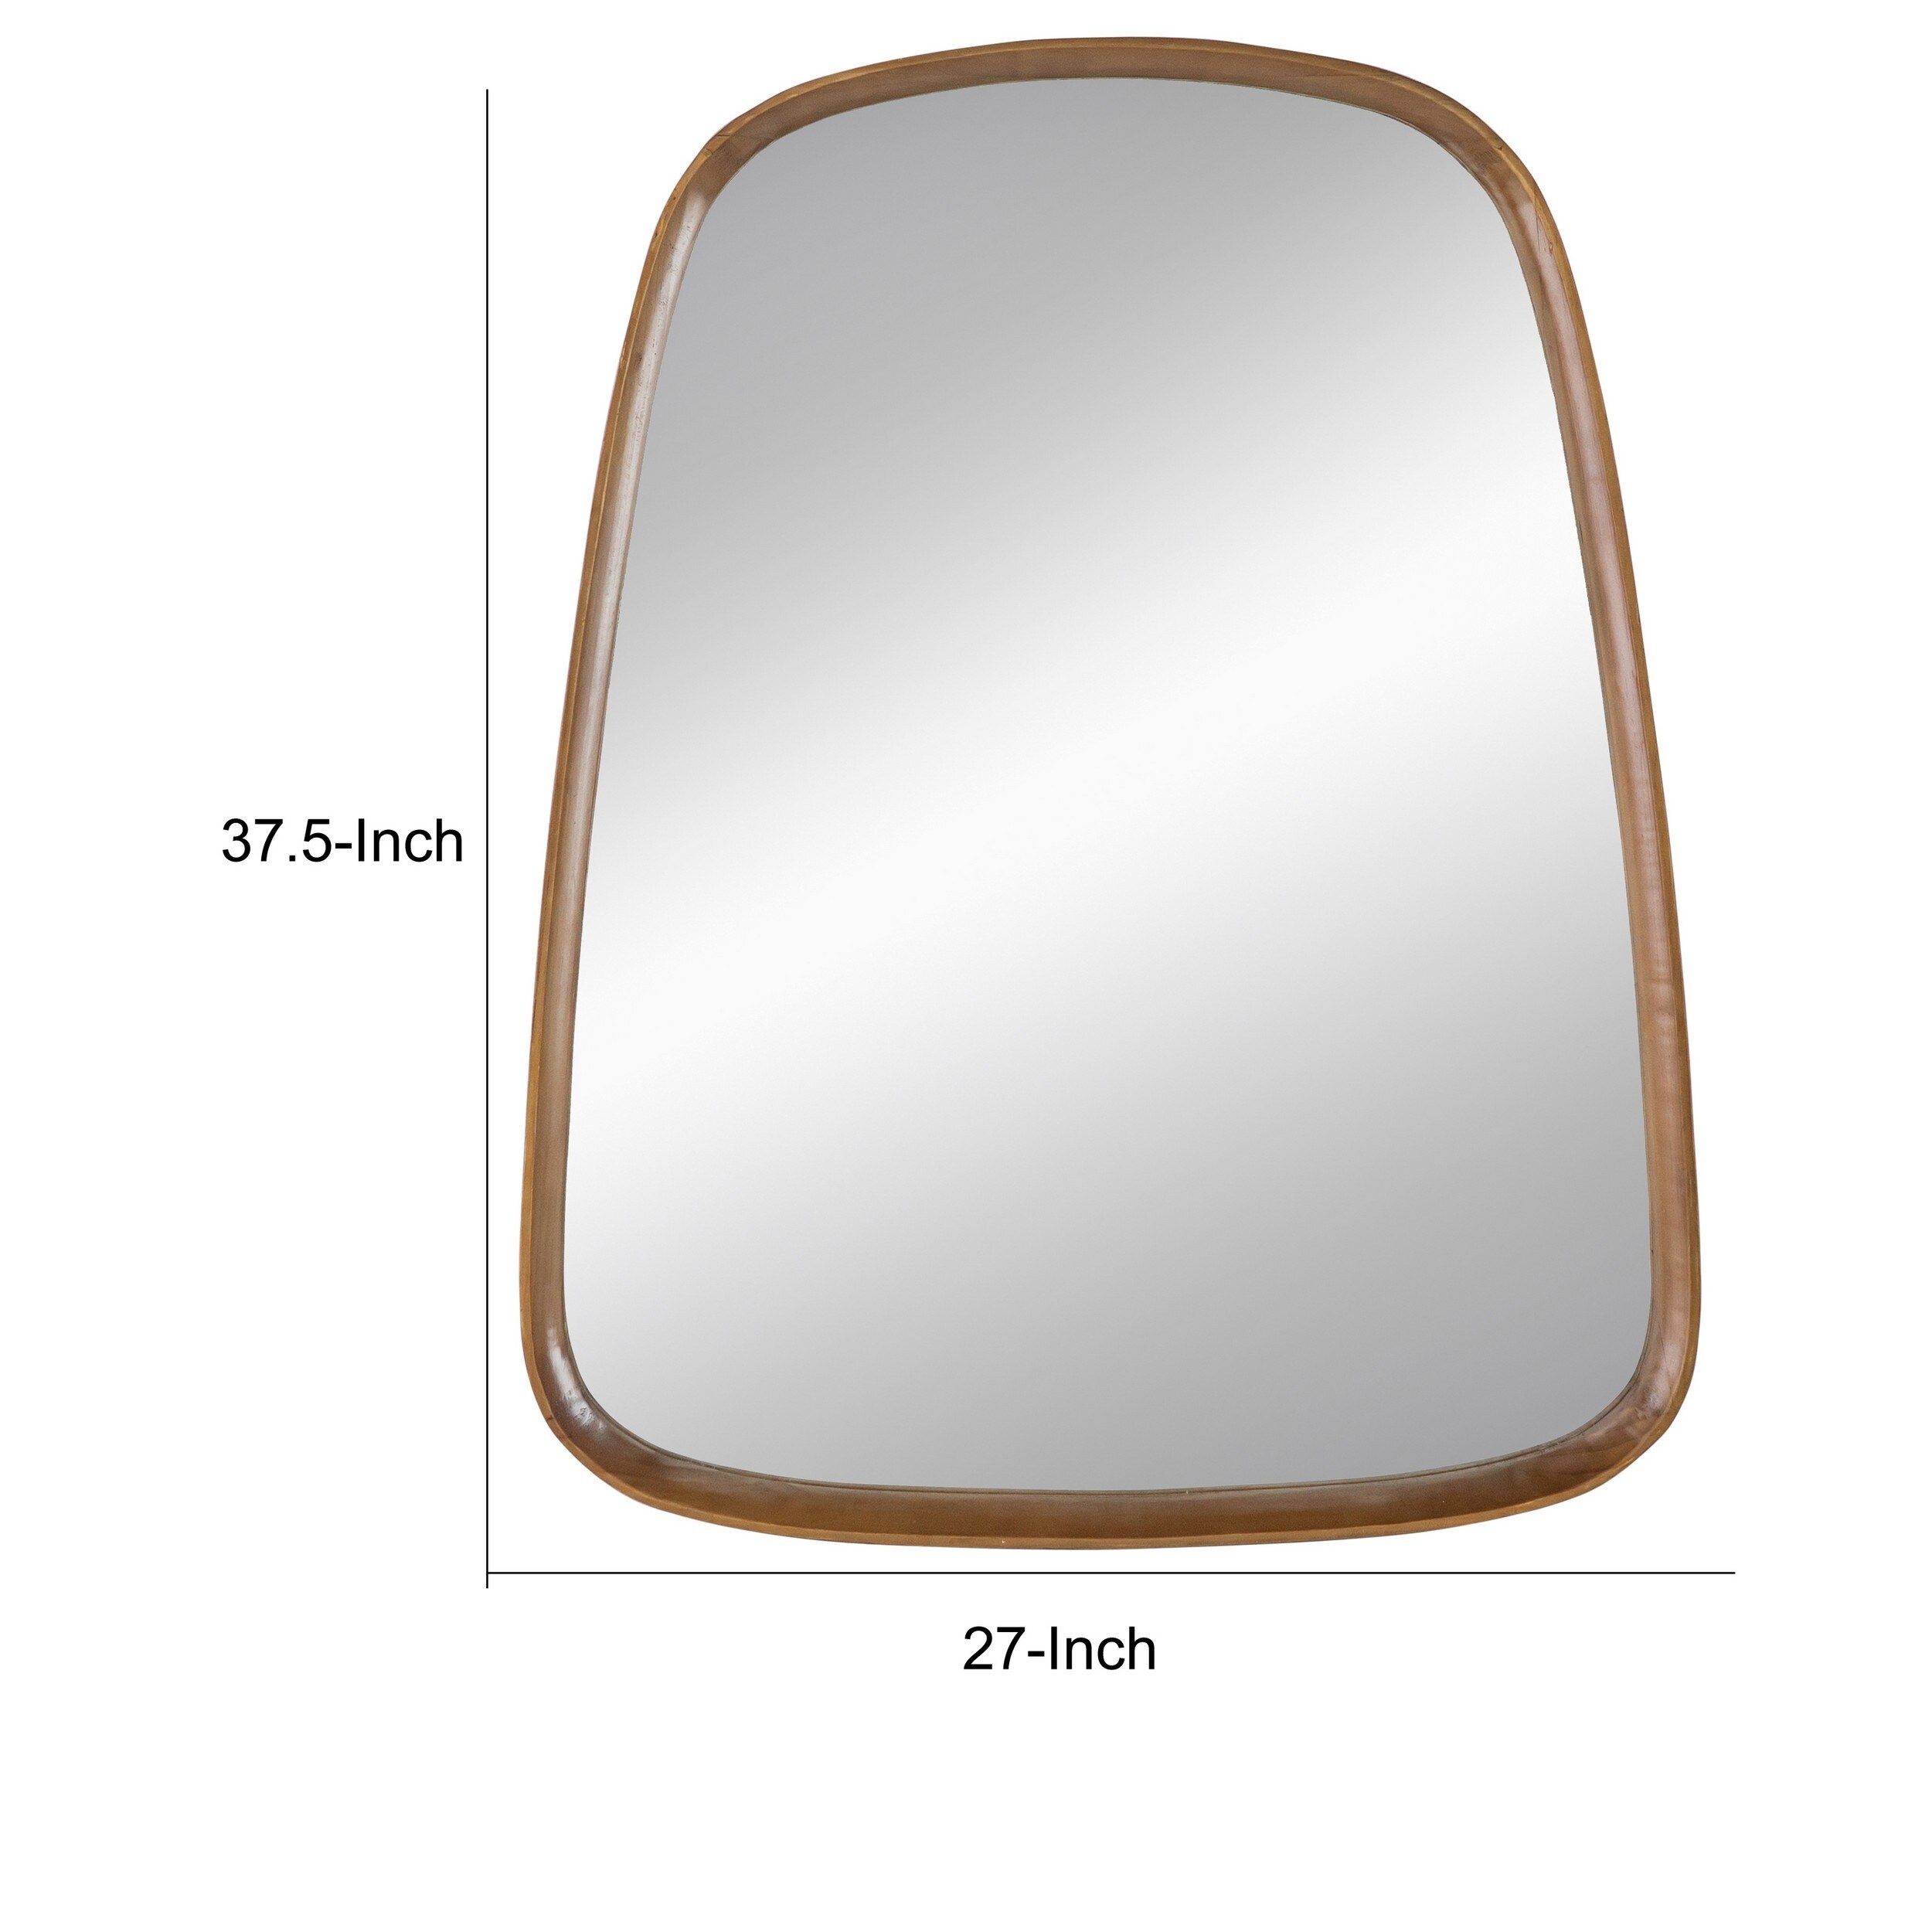 Roe 27 Inch Wall Mirror, Brown Curved Pine Wood Frame, Minimalistic